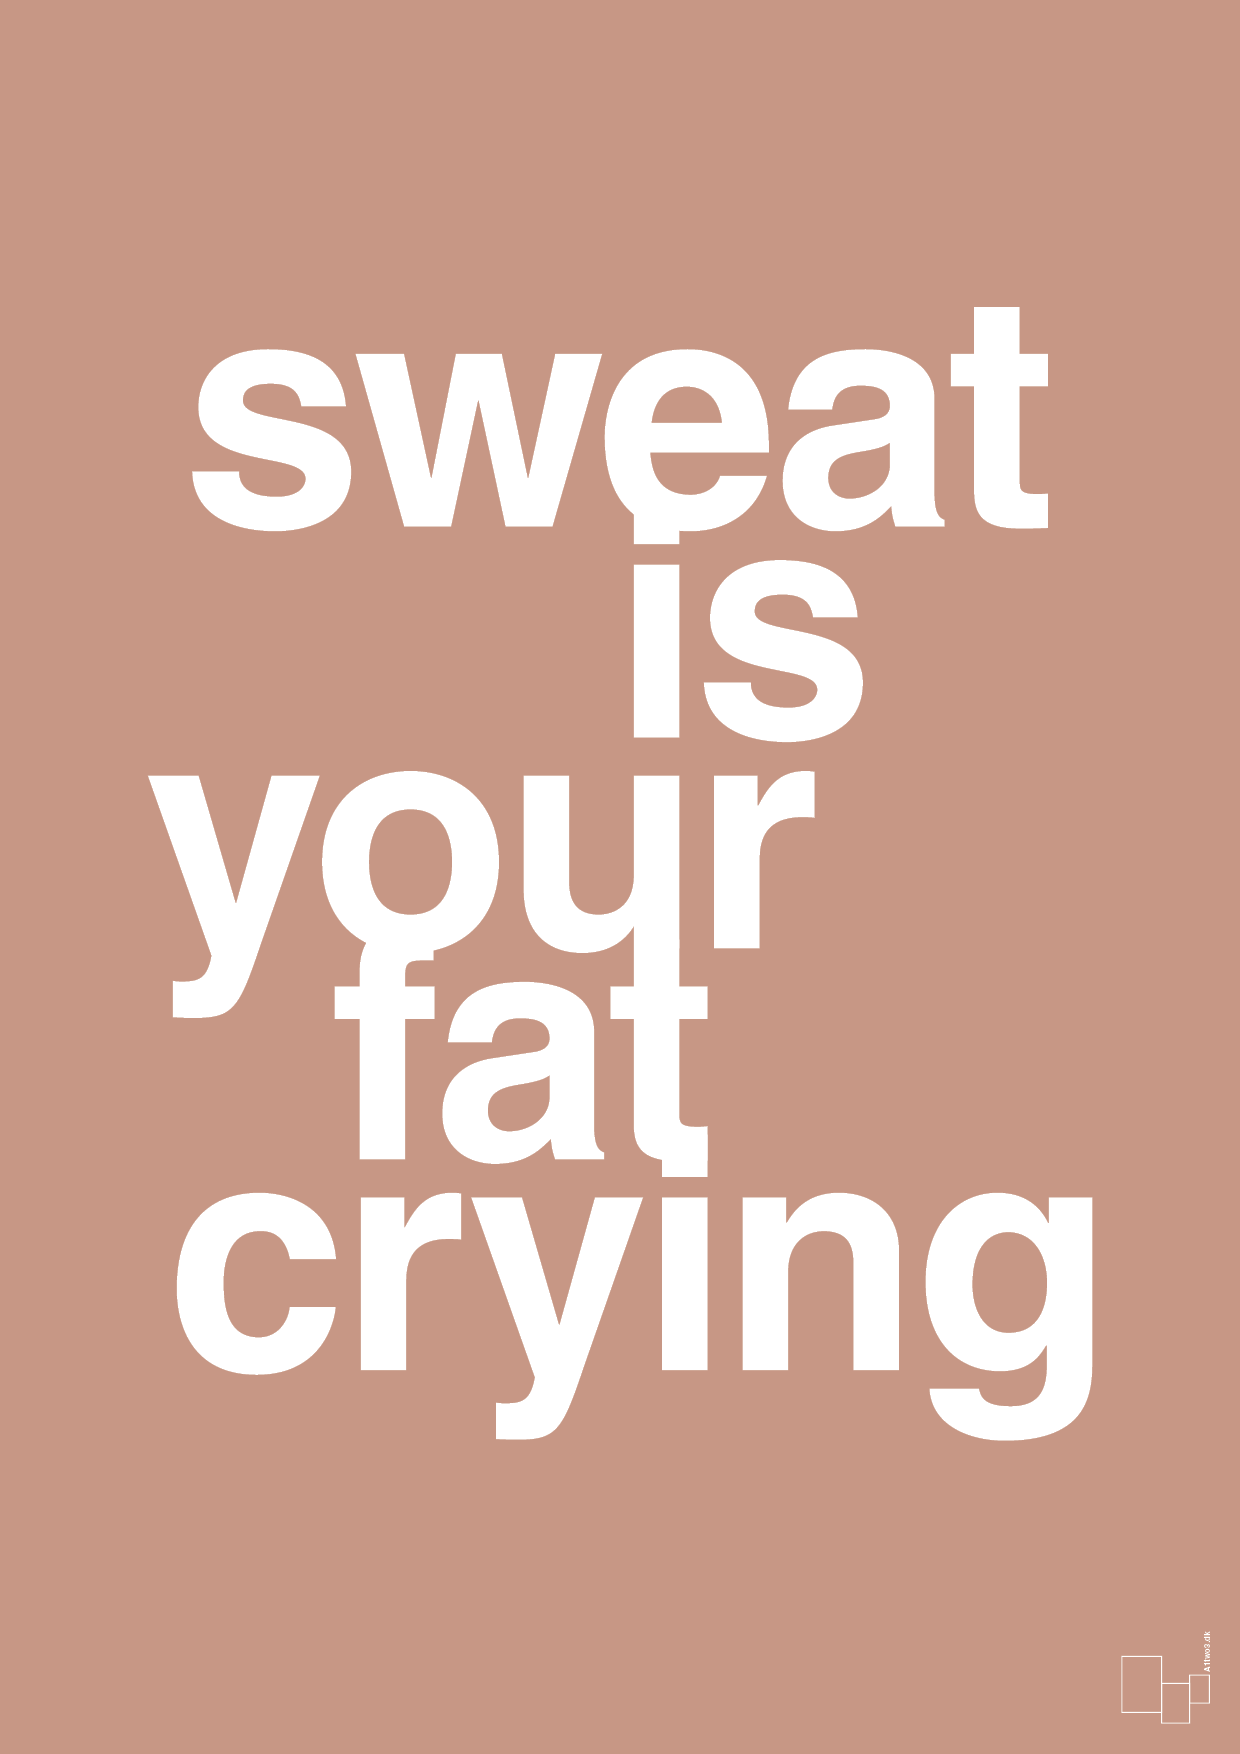 sweat is your fat crying - Plakat med Sport & Fritid i Powder